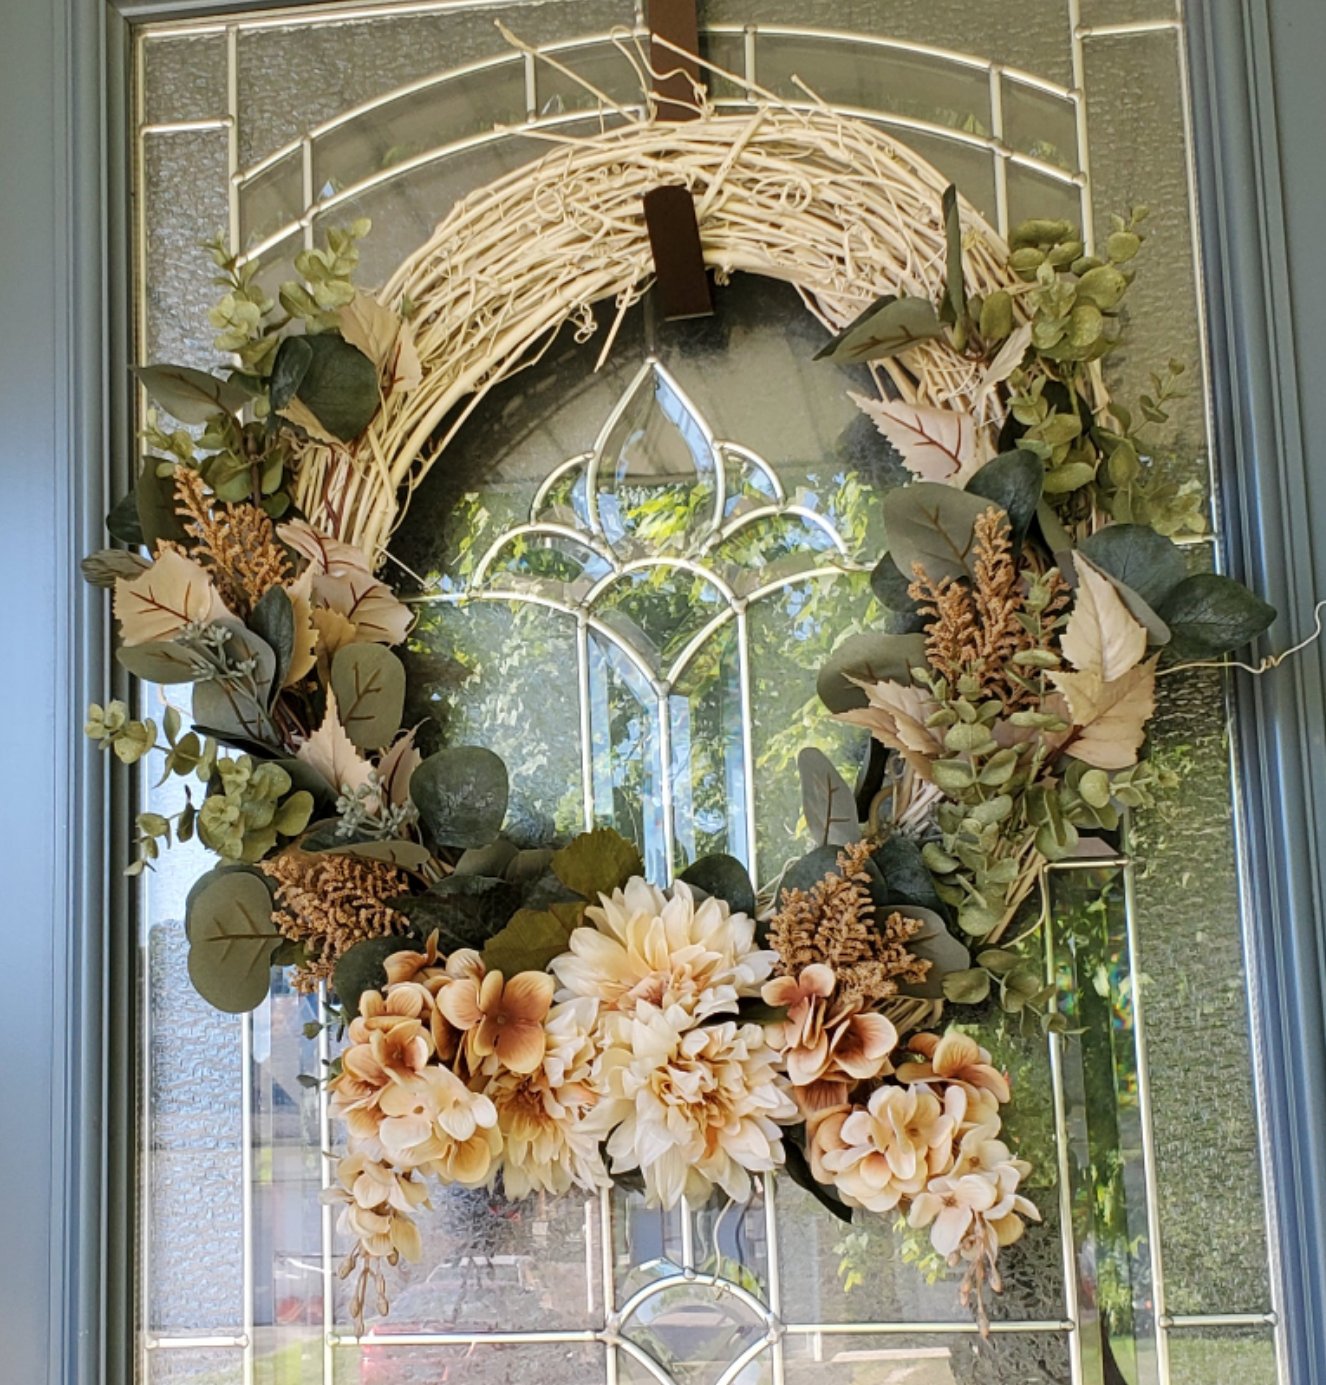 Autumn Wreath with Cream and Pale Pastels - A Delicate and Elegant Home Decor Piece